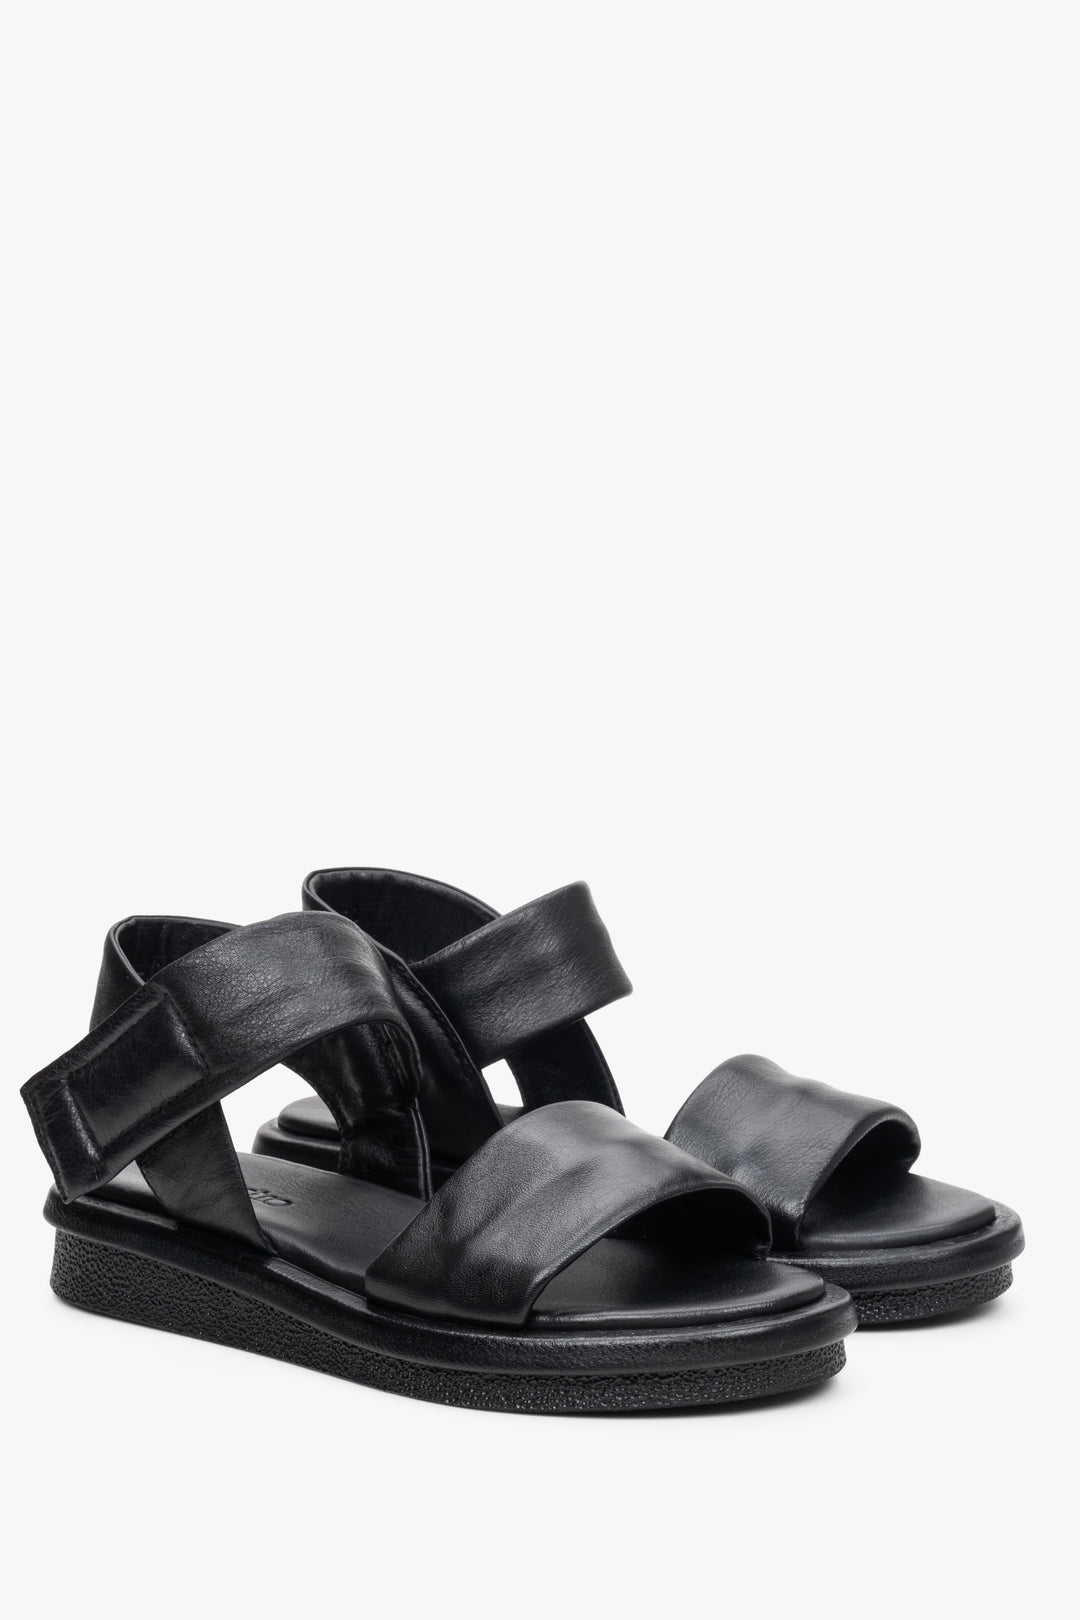 Leather black women's sandals for summer by Estro - presentation of the back of the shoes.